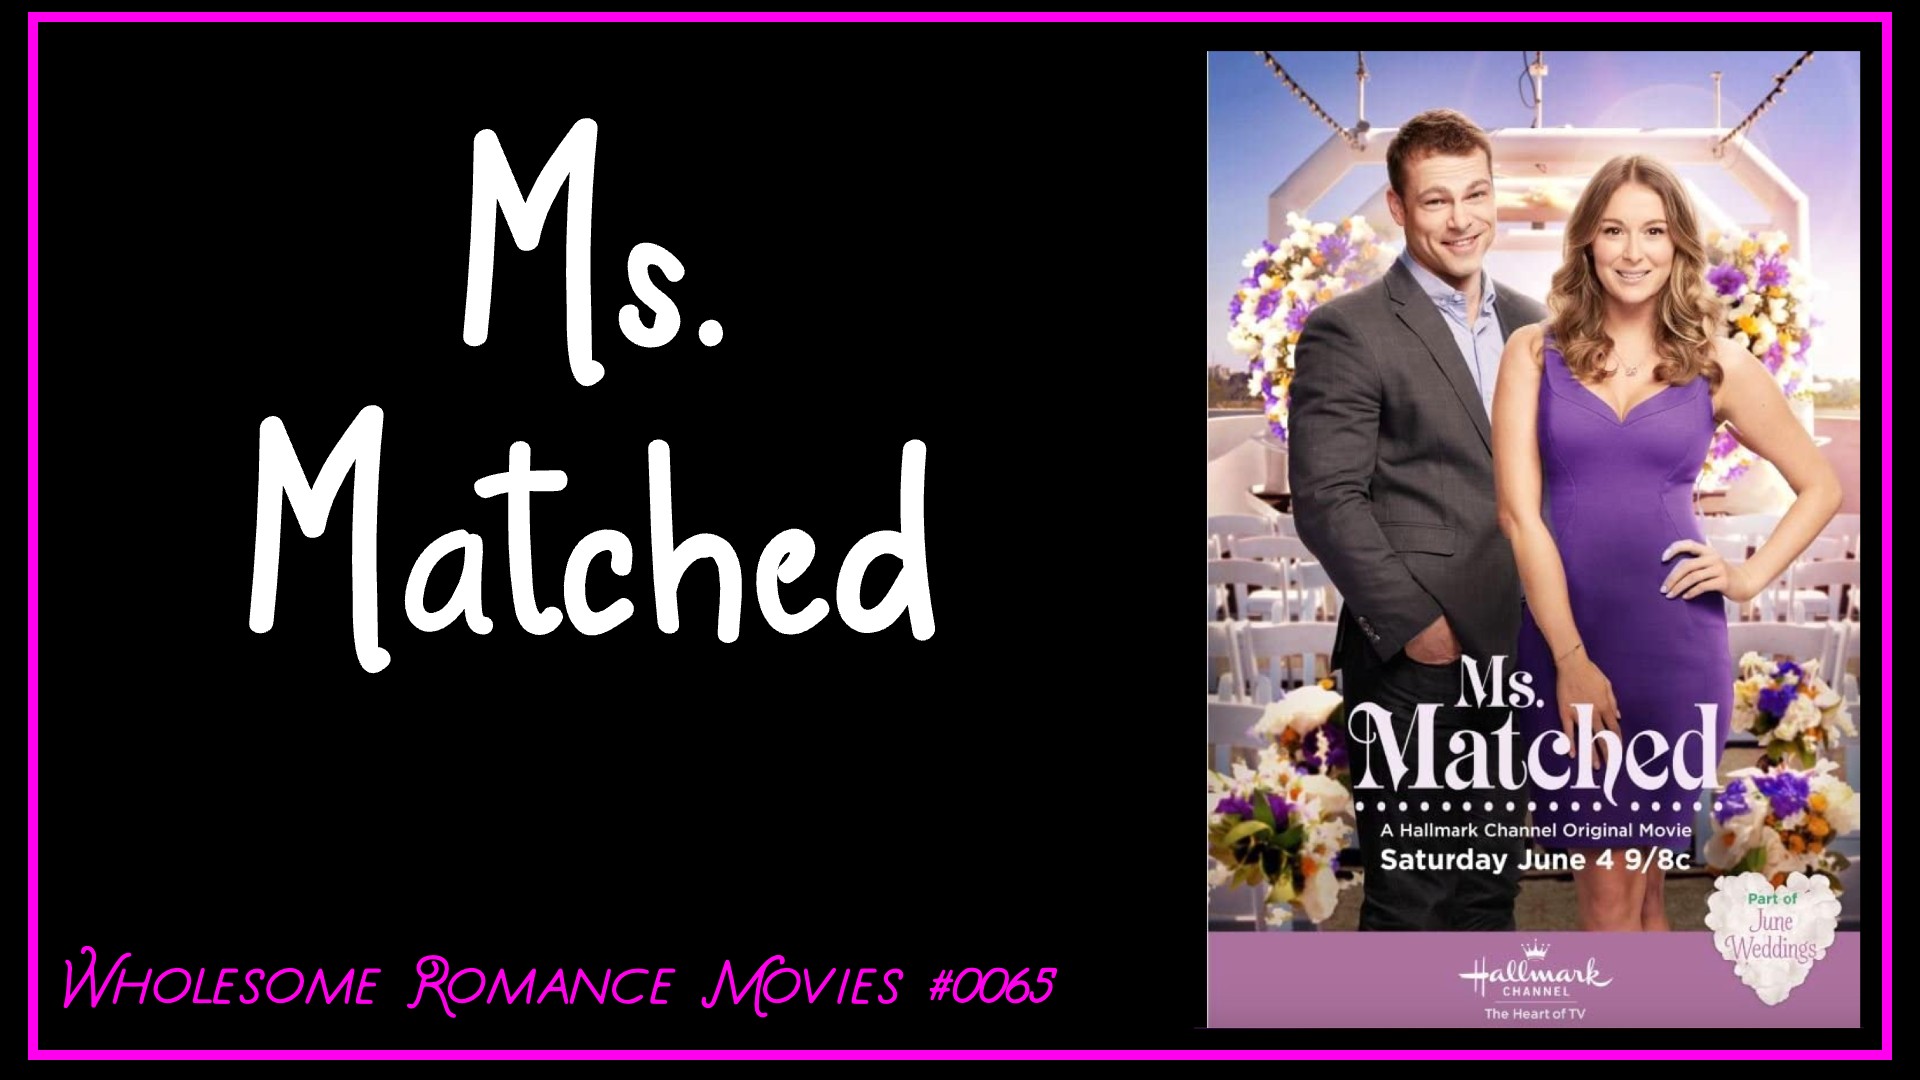 Ms. Matched (2016) WRM Review